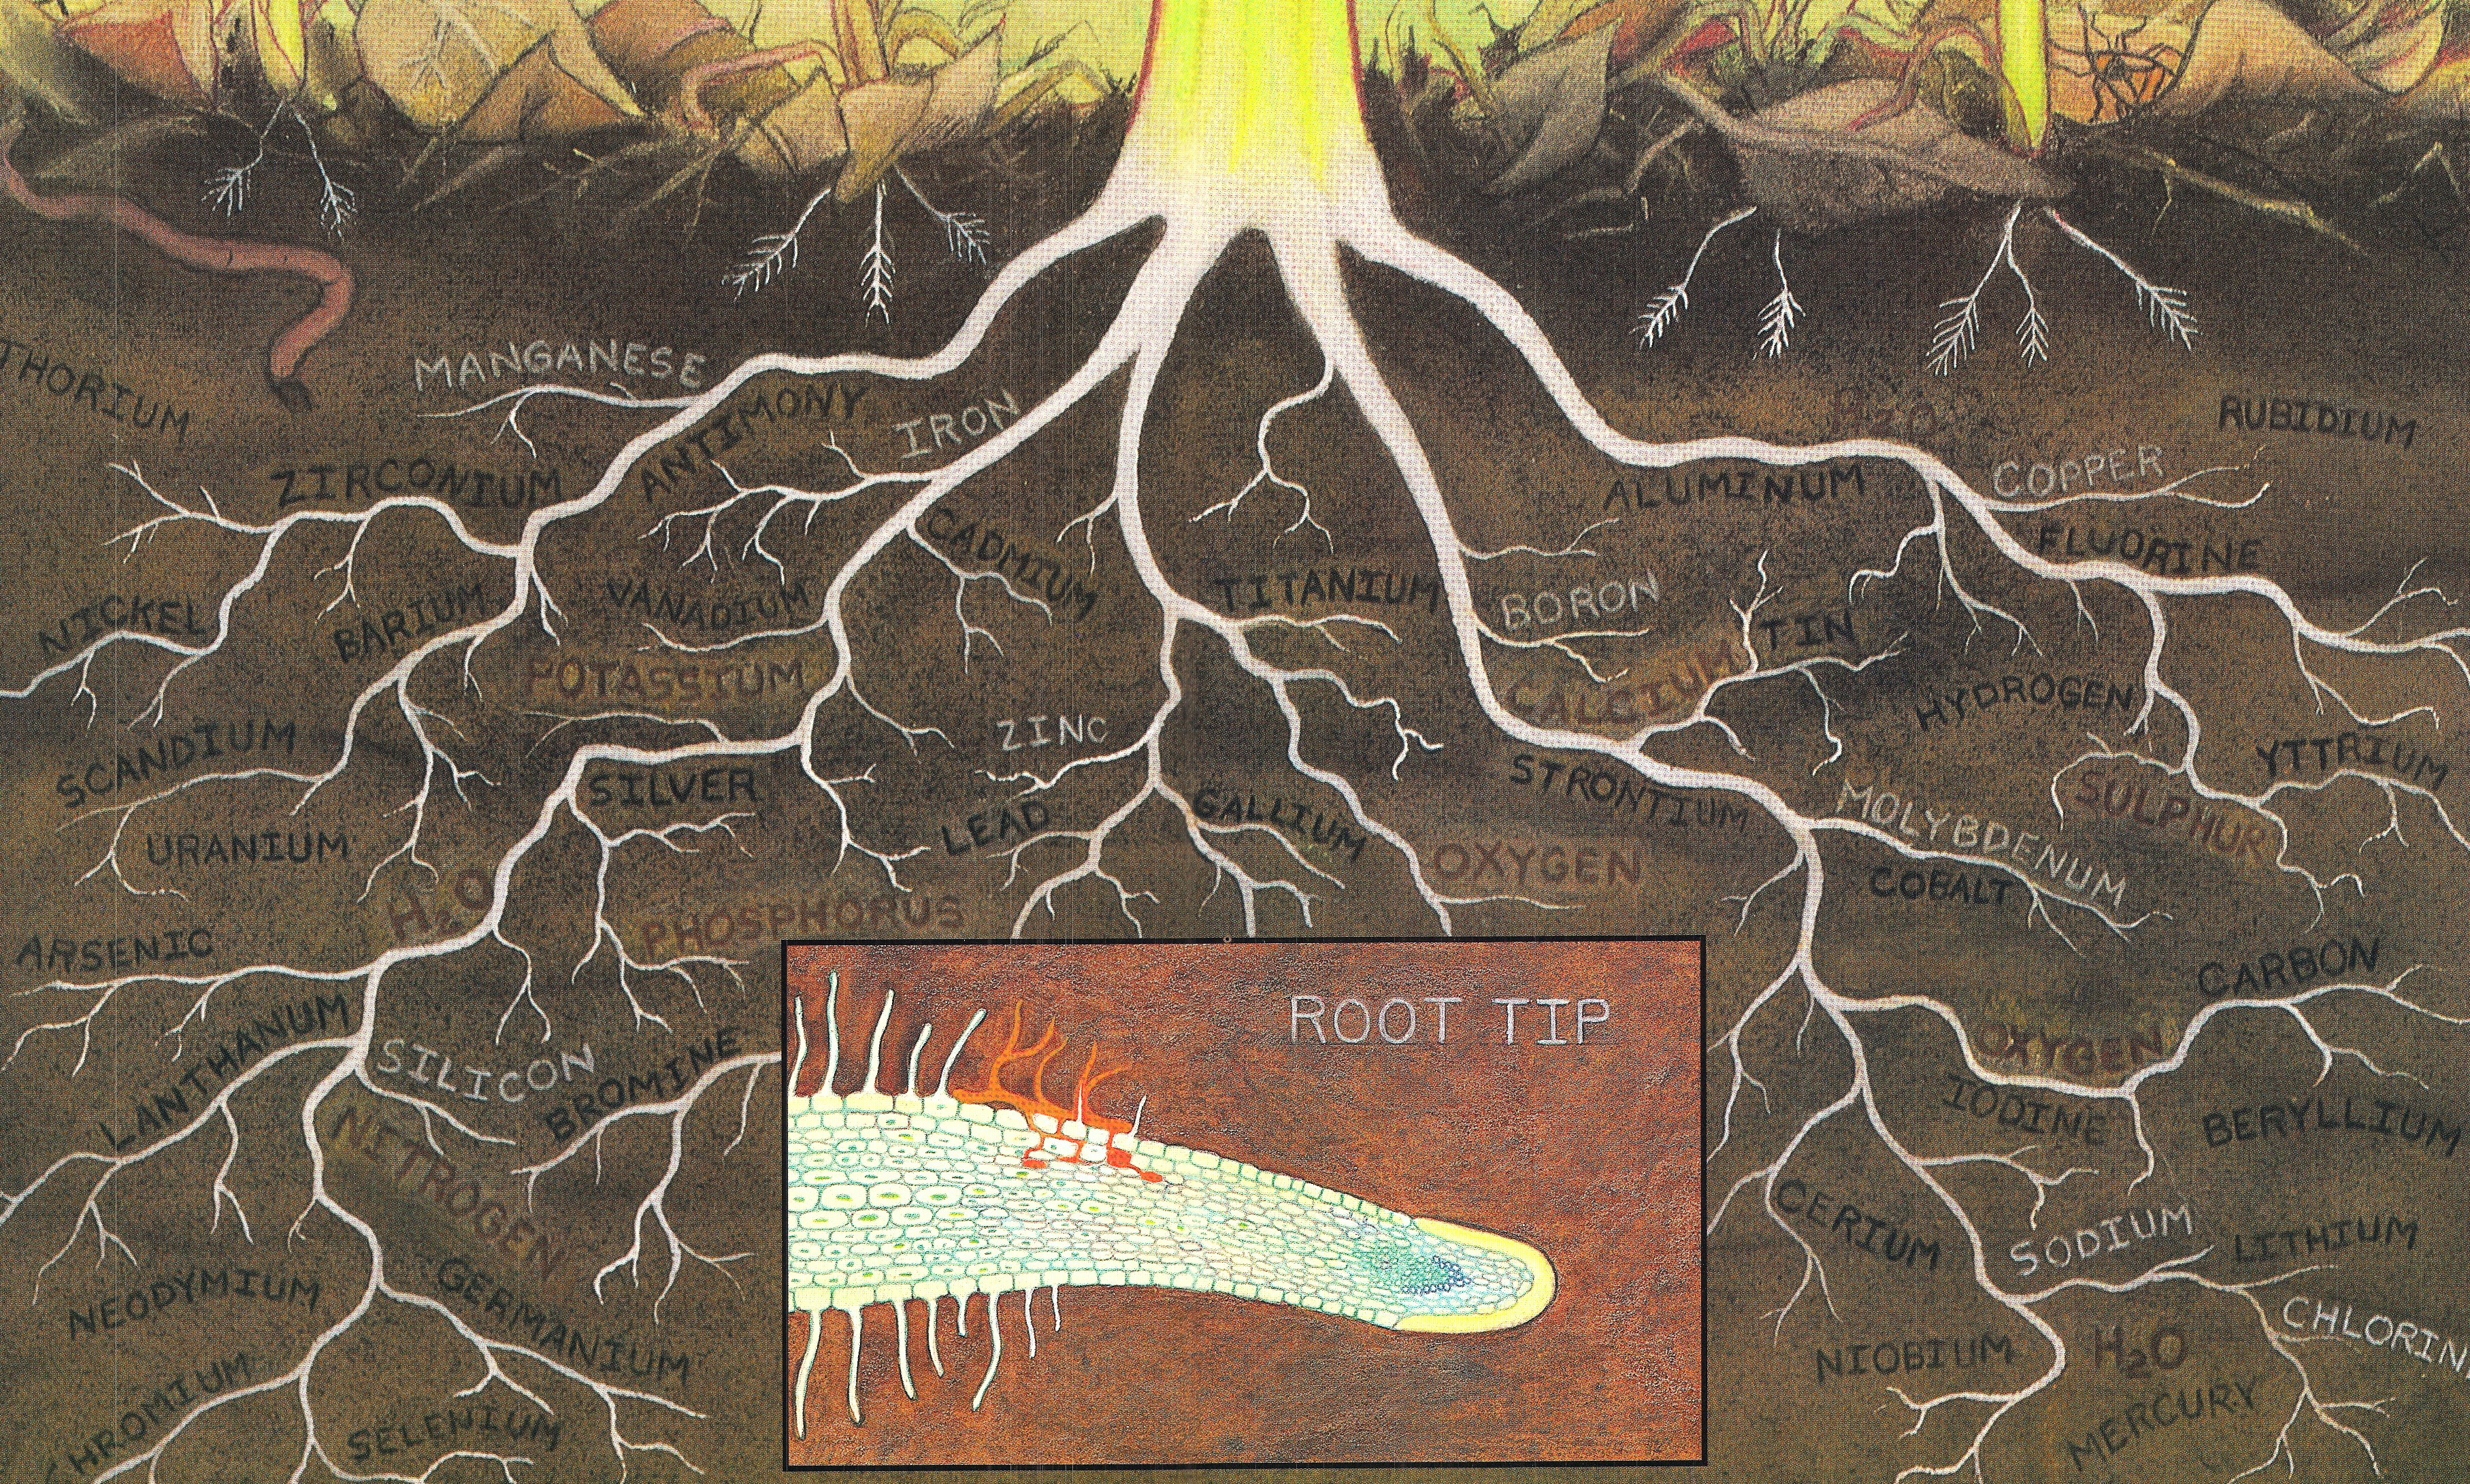 Illustration of roots in the soil with elements labeled. Illustration includes a close-up of a root tip.